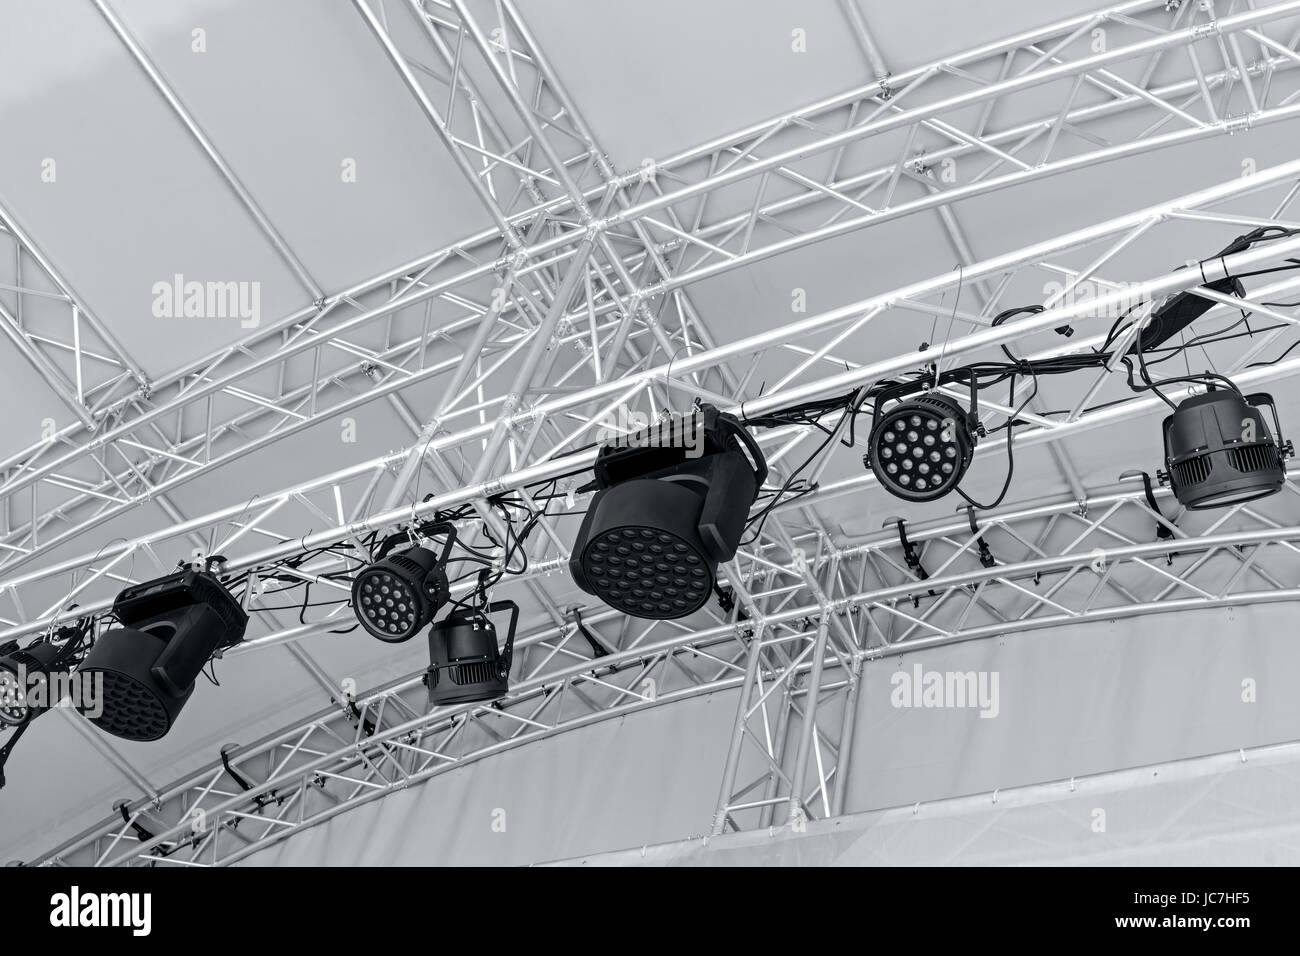 professional stage spotlight equipment. multiple spotlights on outdoor stage. Stock Photo